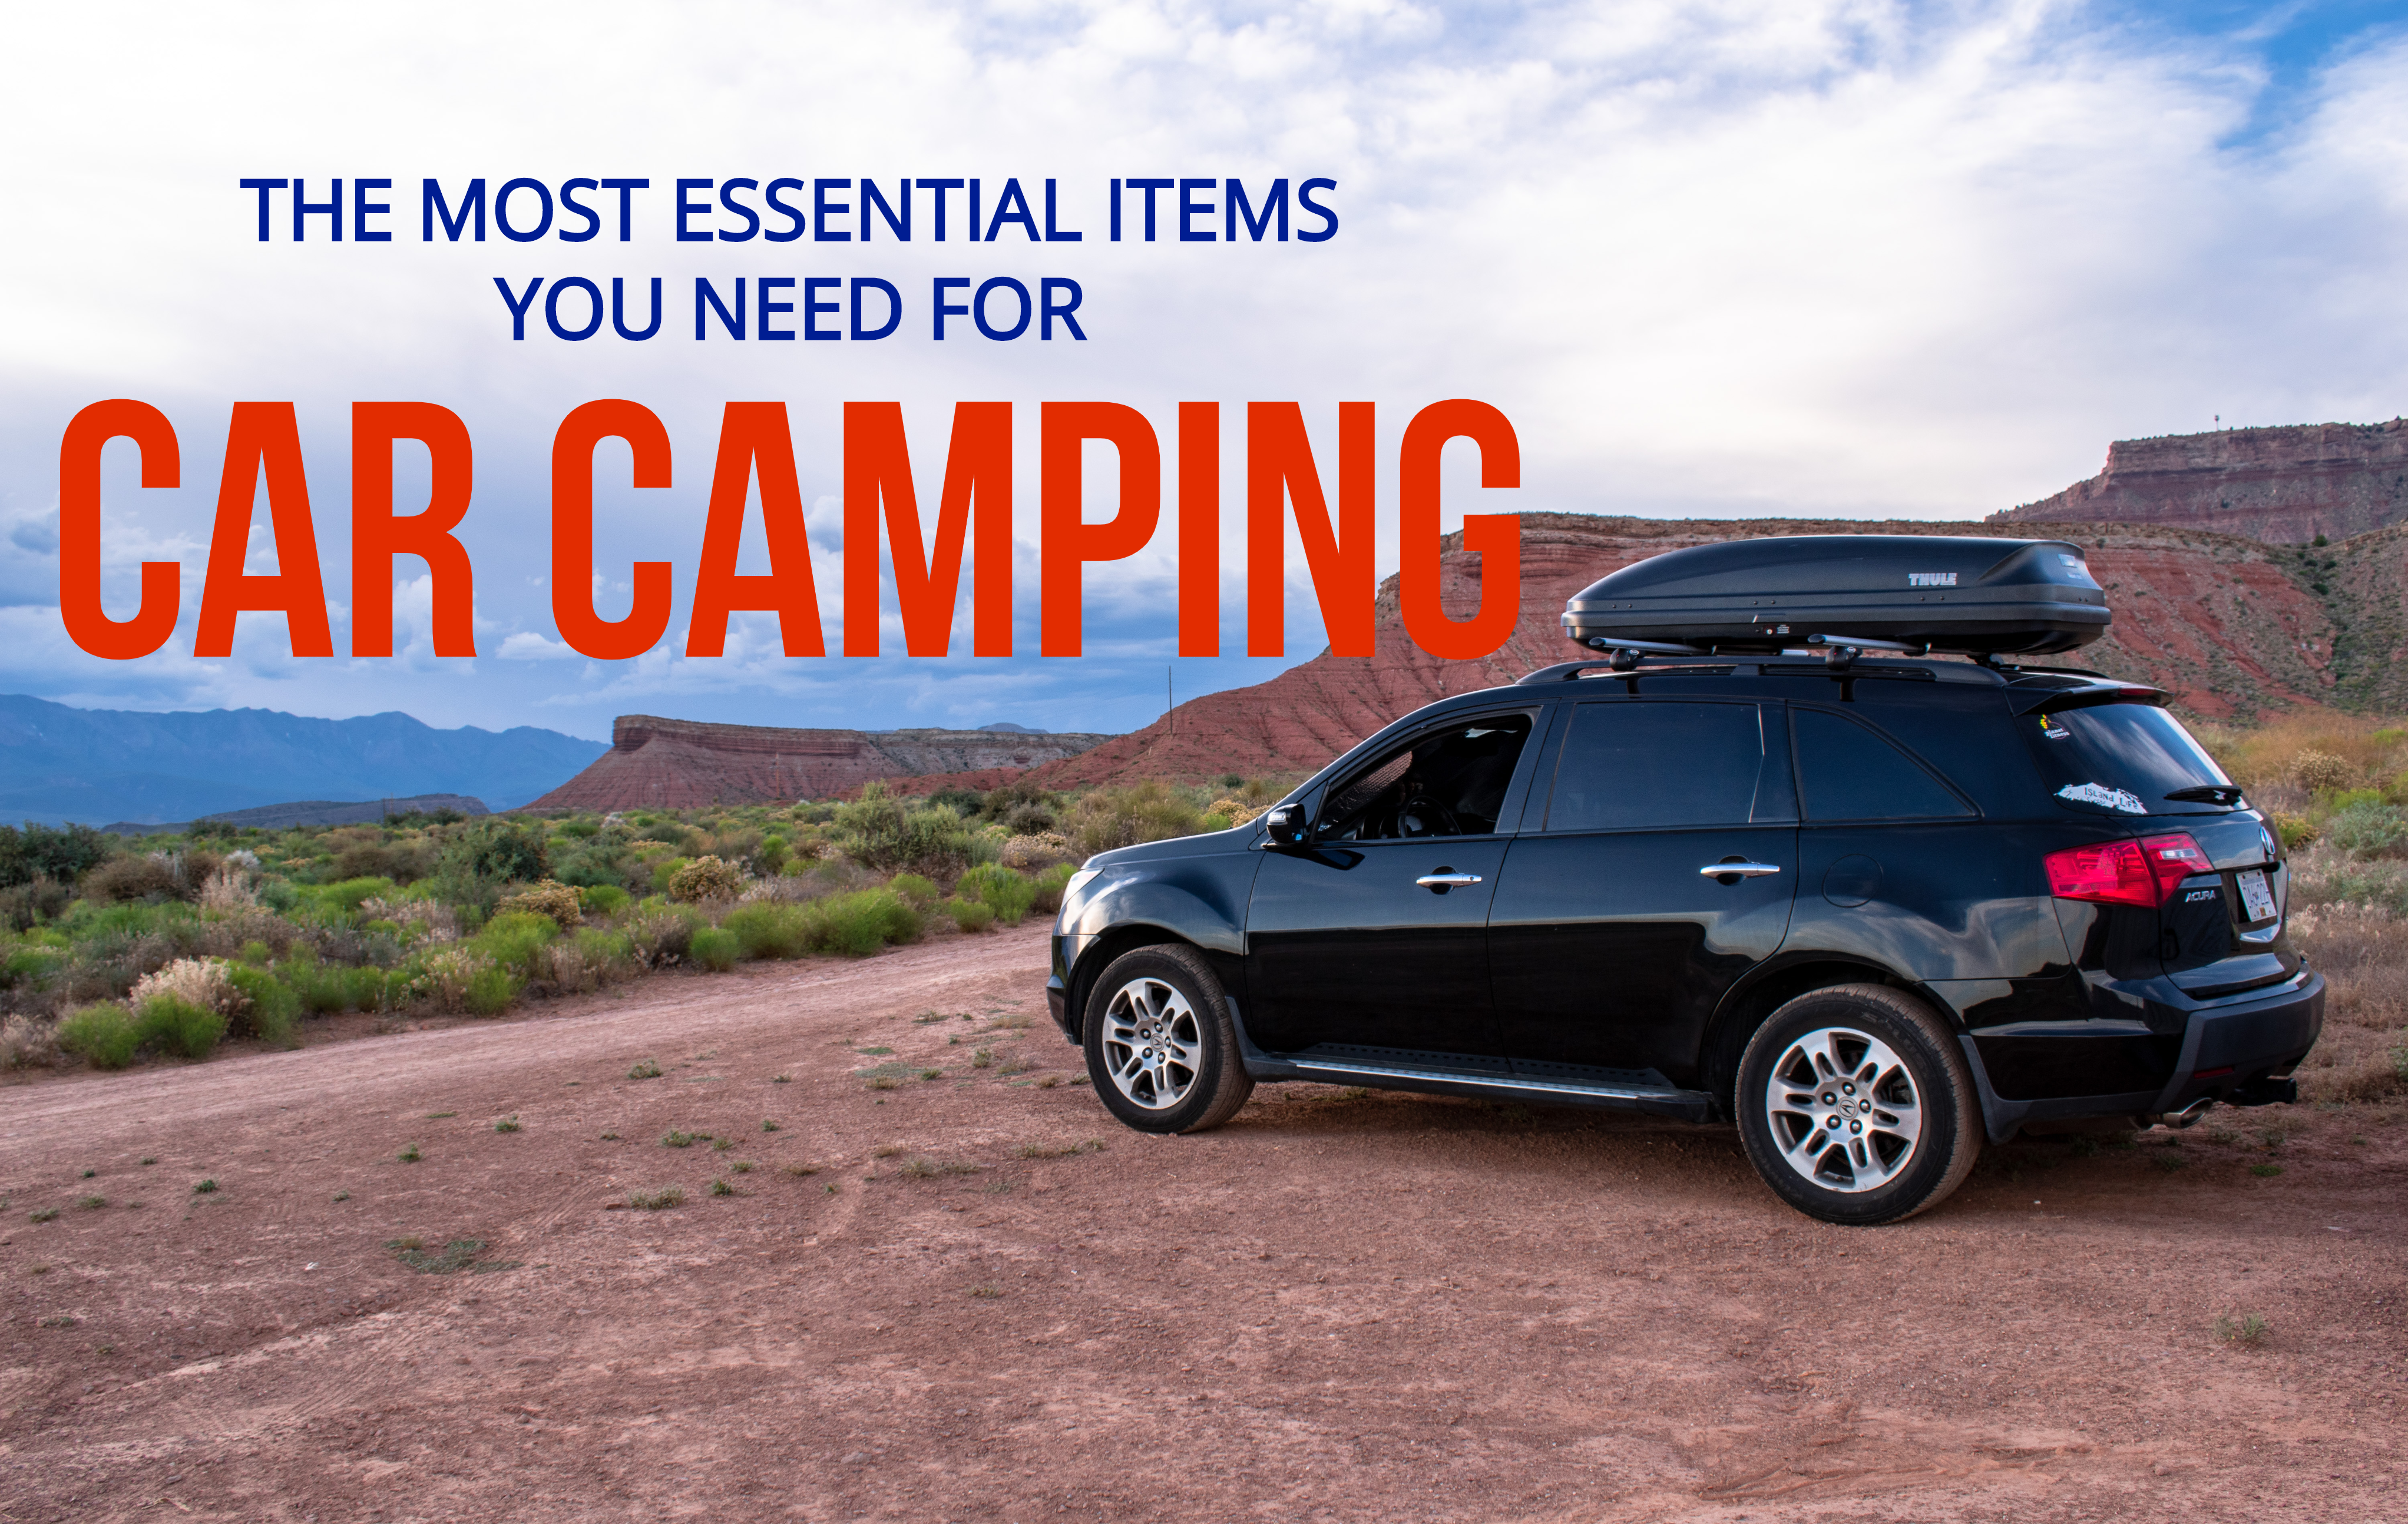 How to Keep Food Cold When Camping - 10 Tips for Car Campers